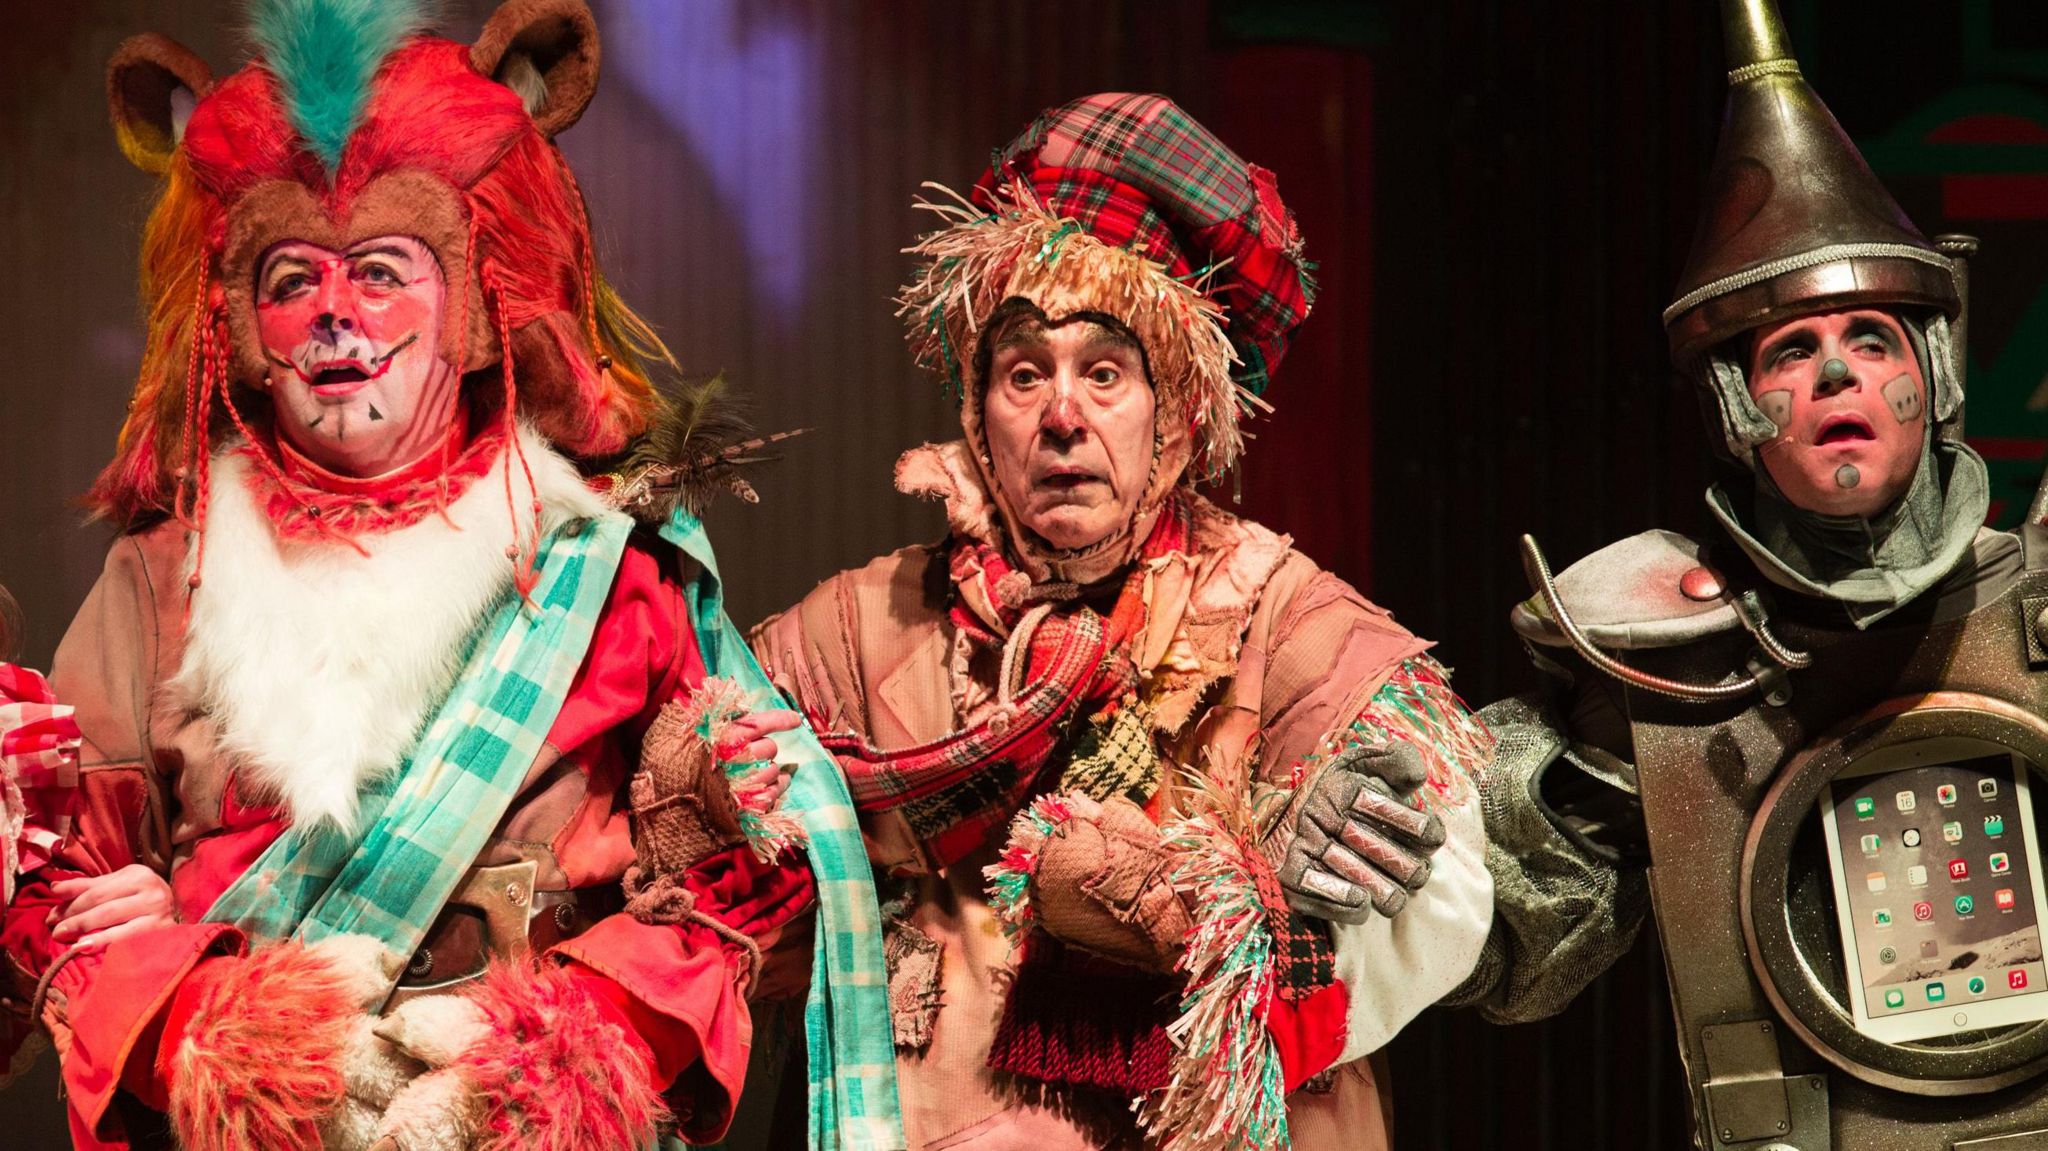 Chris McClure performed as the Scarecrow in The Wizard of Never Woz panto in 2017-18